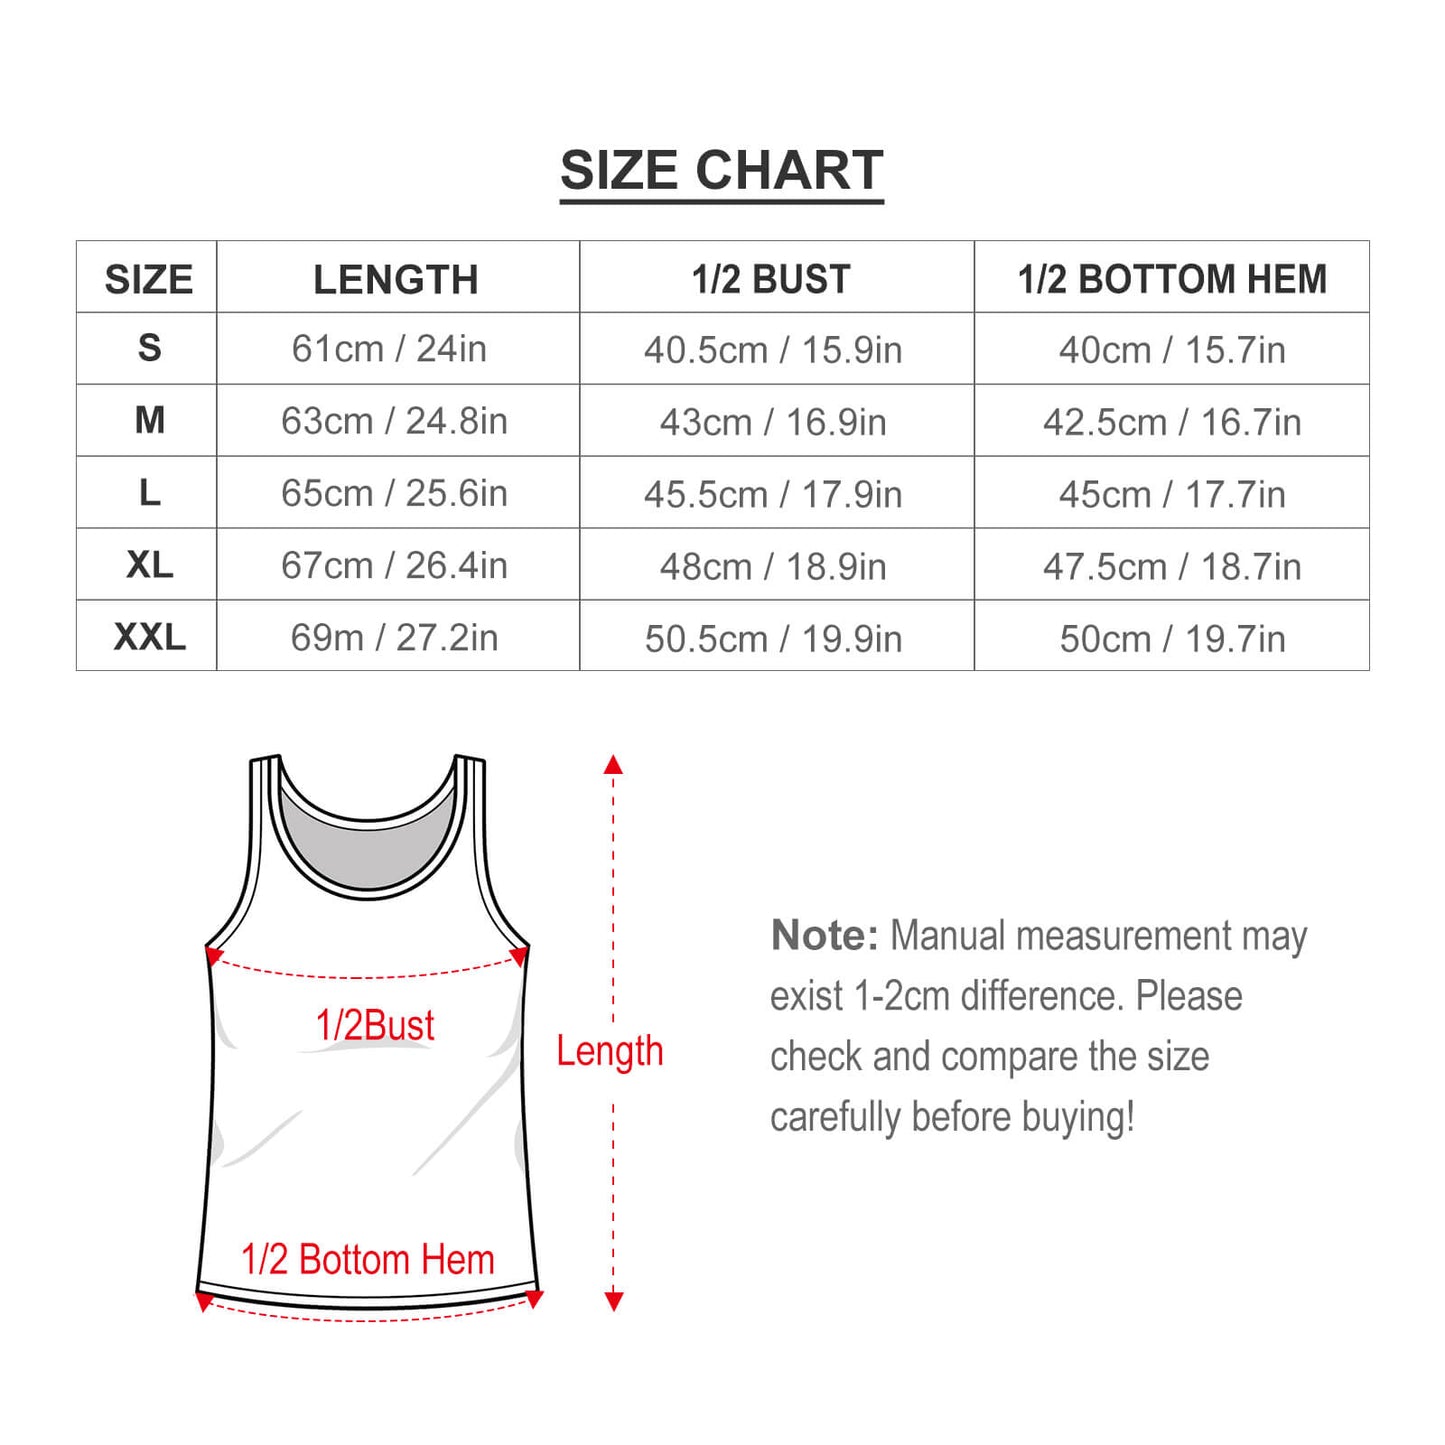 Online Customize Casual Wear for Women Tank Top Brush Pigment Starry Sky